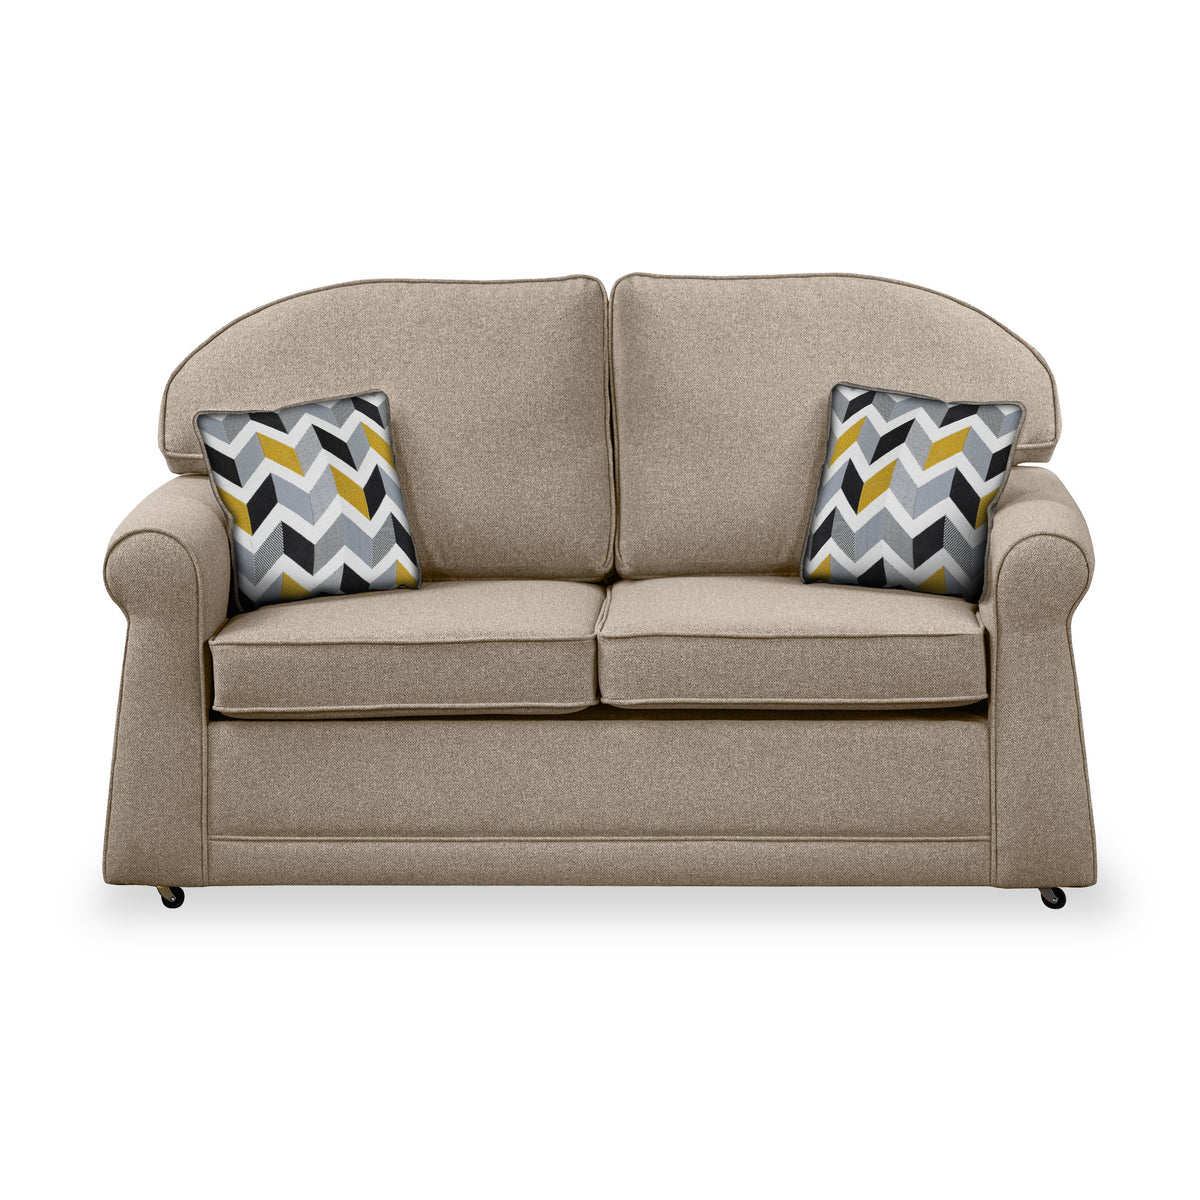 Croxdon Oatmeal Faux Linen 2 Seater Sofabed with Mustard Scatter Cushions from Roseland Furniture